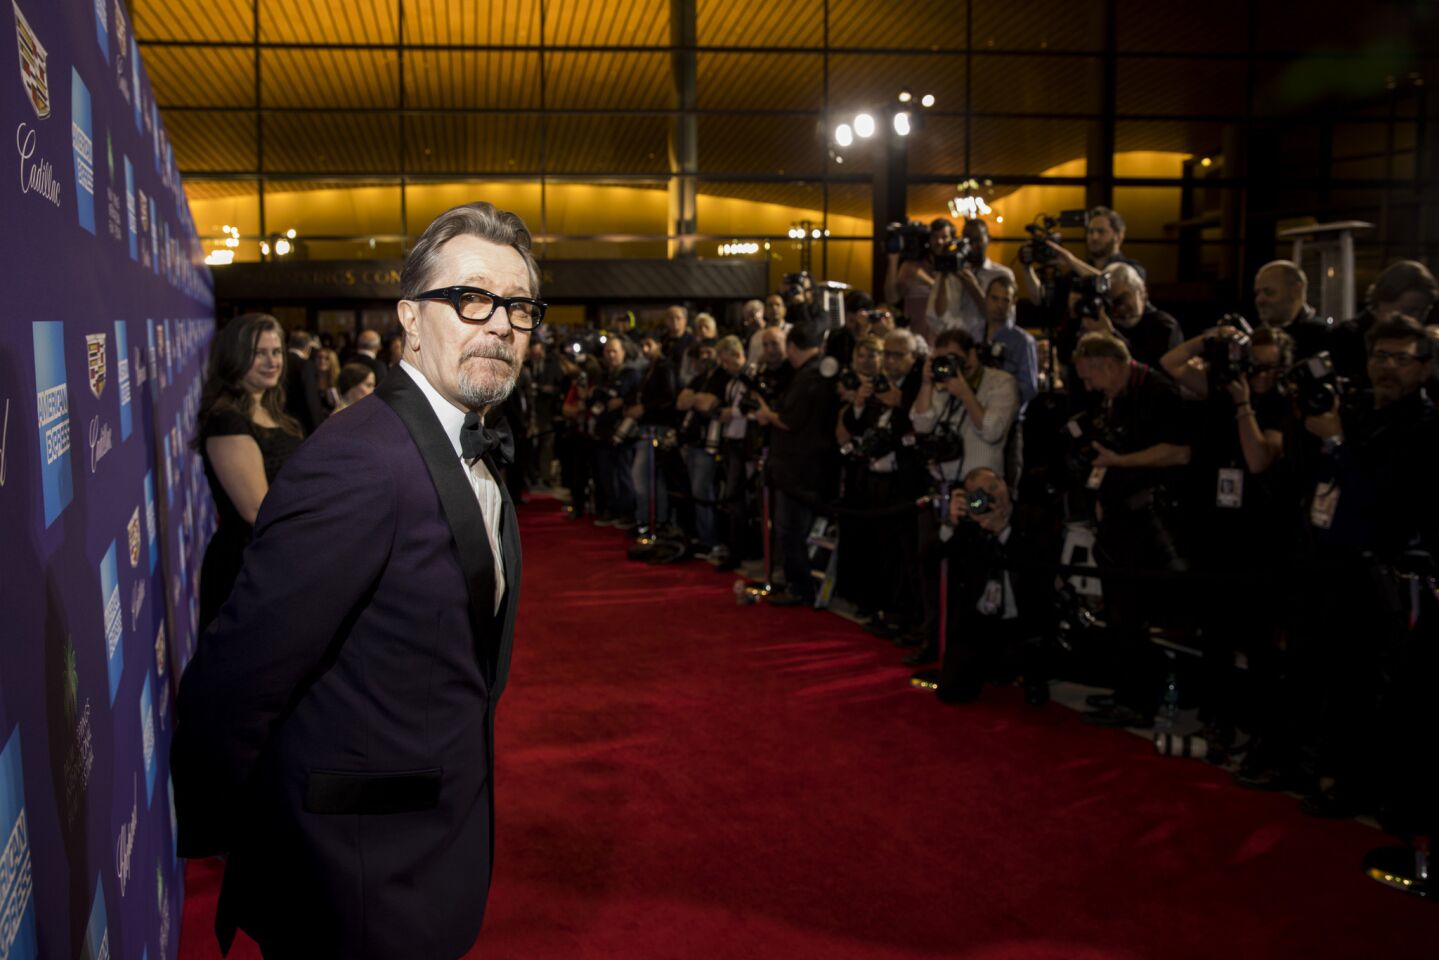 Gary Oldman on the red carpet of the 18th annual Palm Springs International Film Festival Gala. Oldman received the Desert Palm Achievement Award for his work in "Darkest Hour."